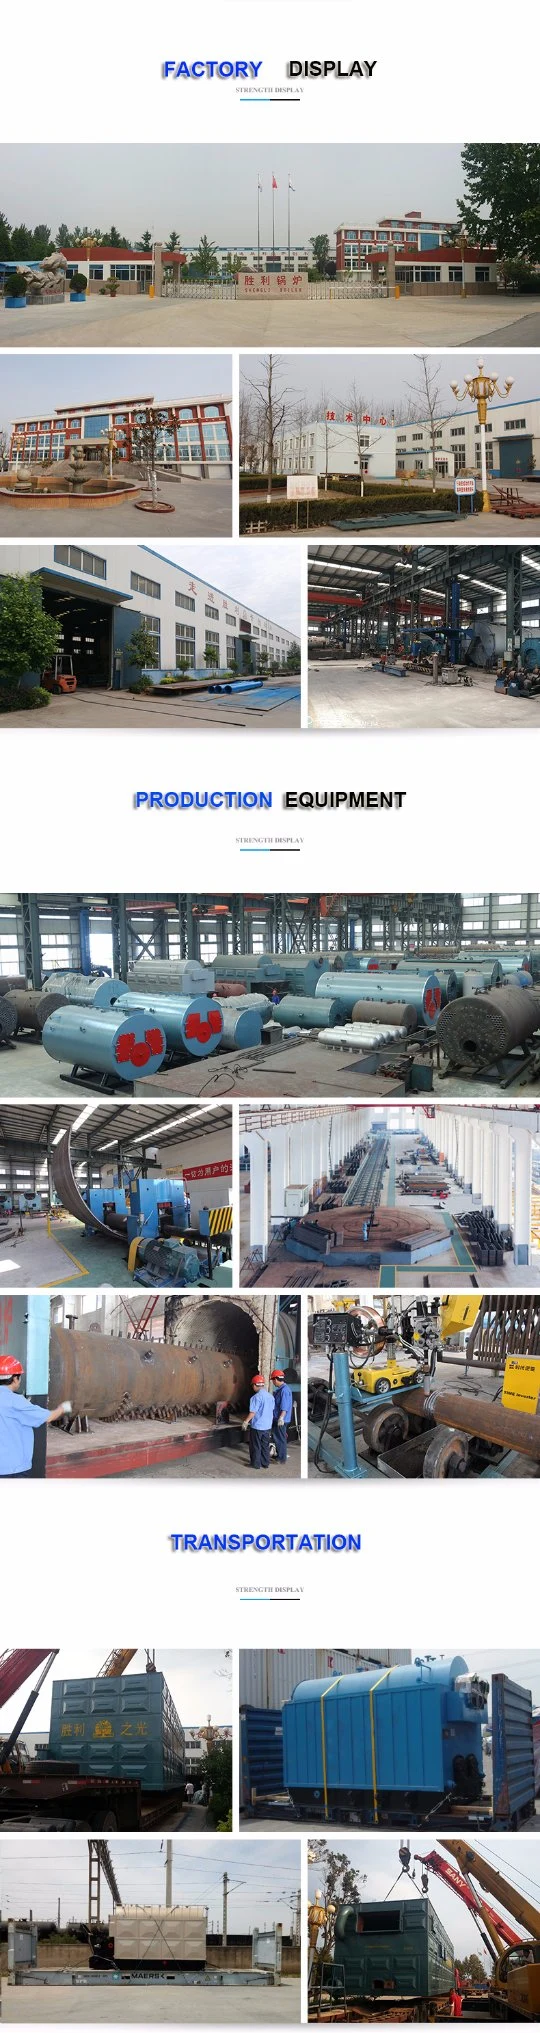 Factory Price Chain Grate Industrial Coal Steam Boiler